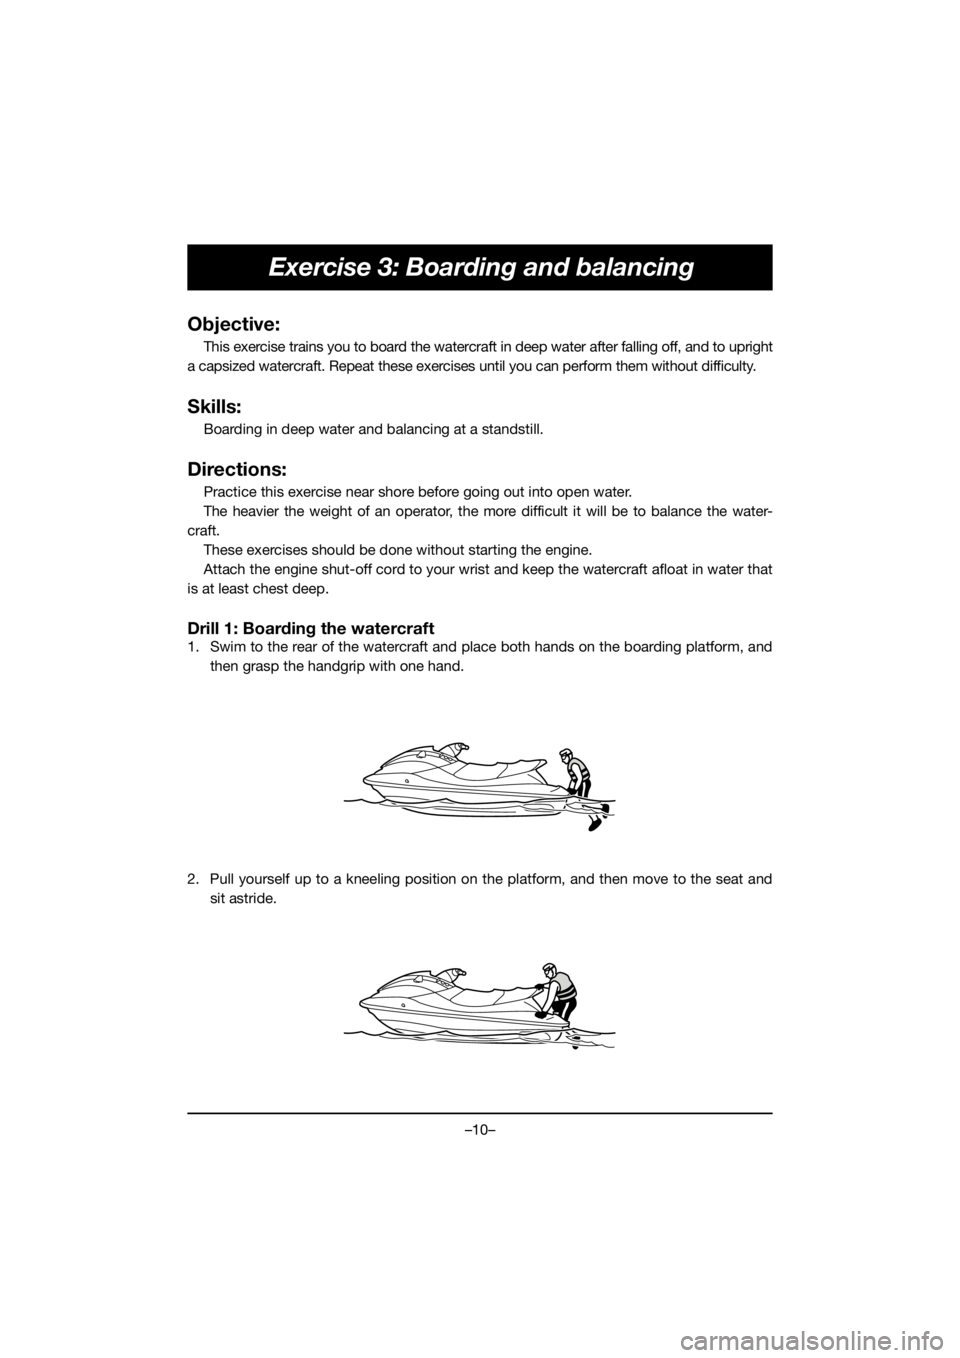 YAMAHA EX 2020  Manual de utilização (in Portuguese) –10–
Exercise 3: Boarding and balancing
Objective:
This exercise trains you to board the watercraft in deep water after falling off, and to upright
a capsized watercraft. Repeat these exercises un